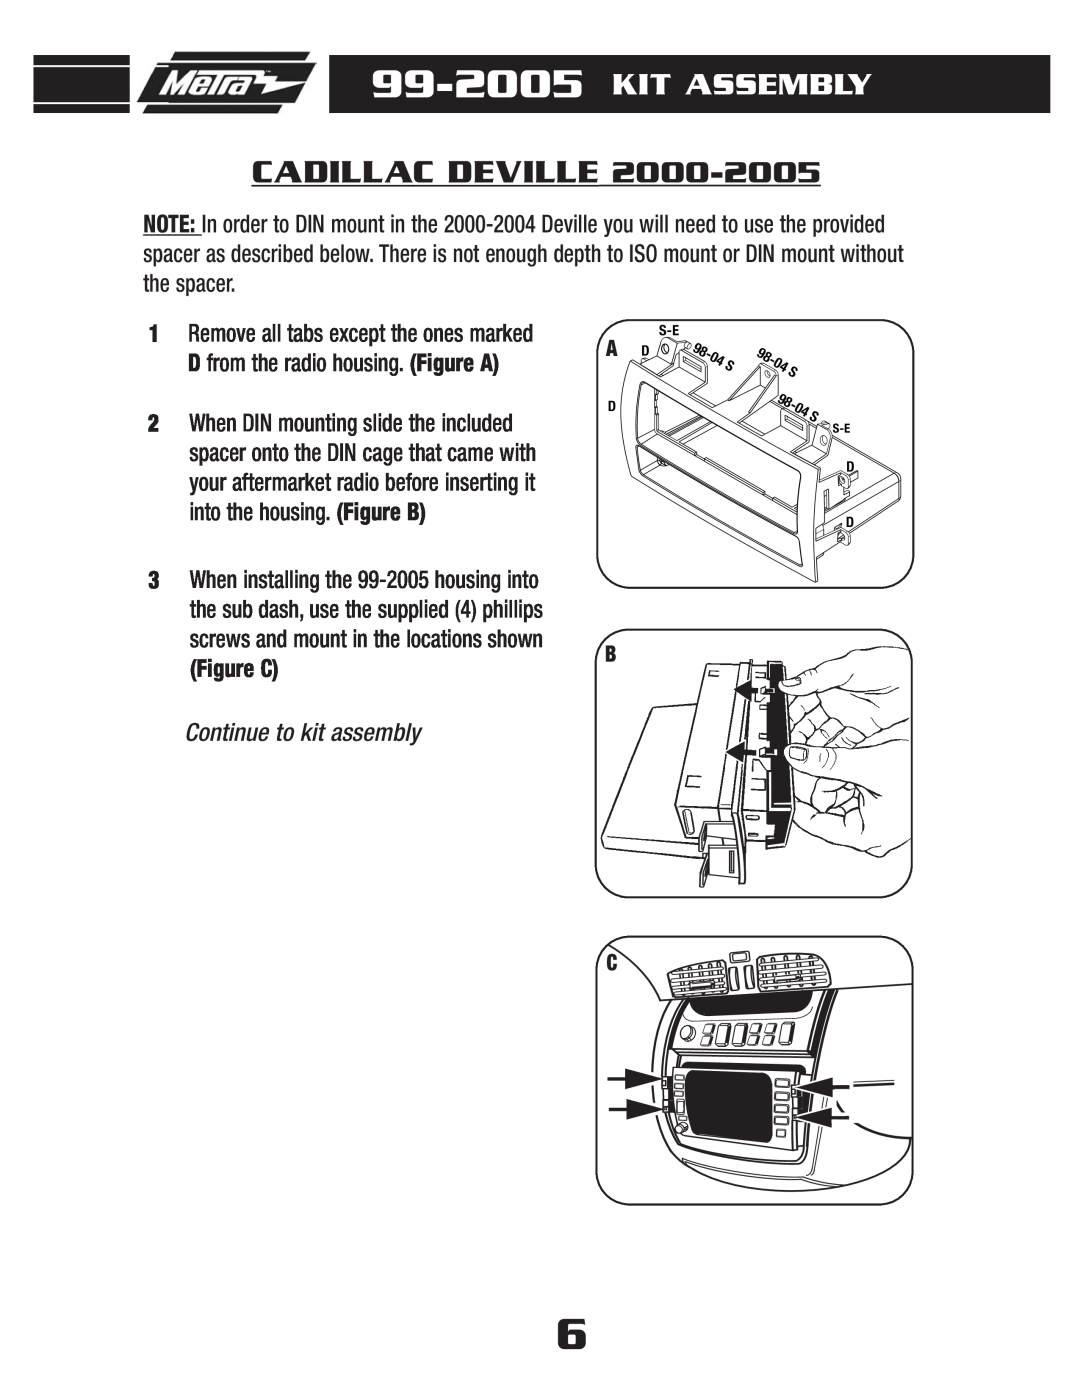 Metra Electronics 99-2005 installation instructions Cadillac Deville, Kit Assembly, Continue to kit assembly 